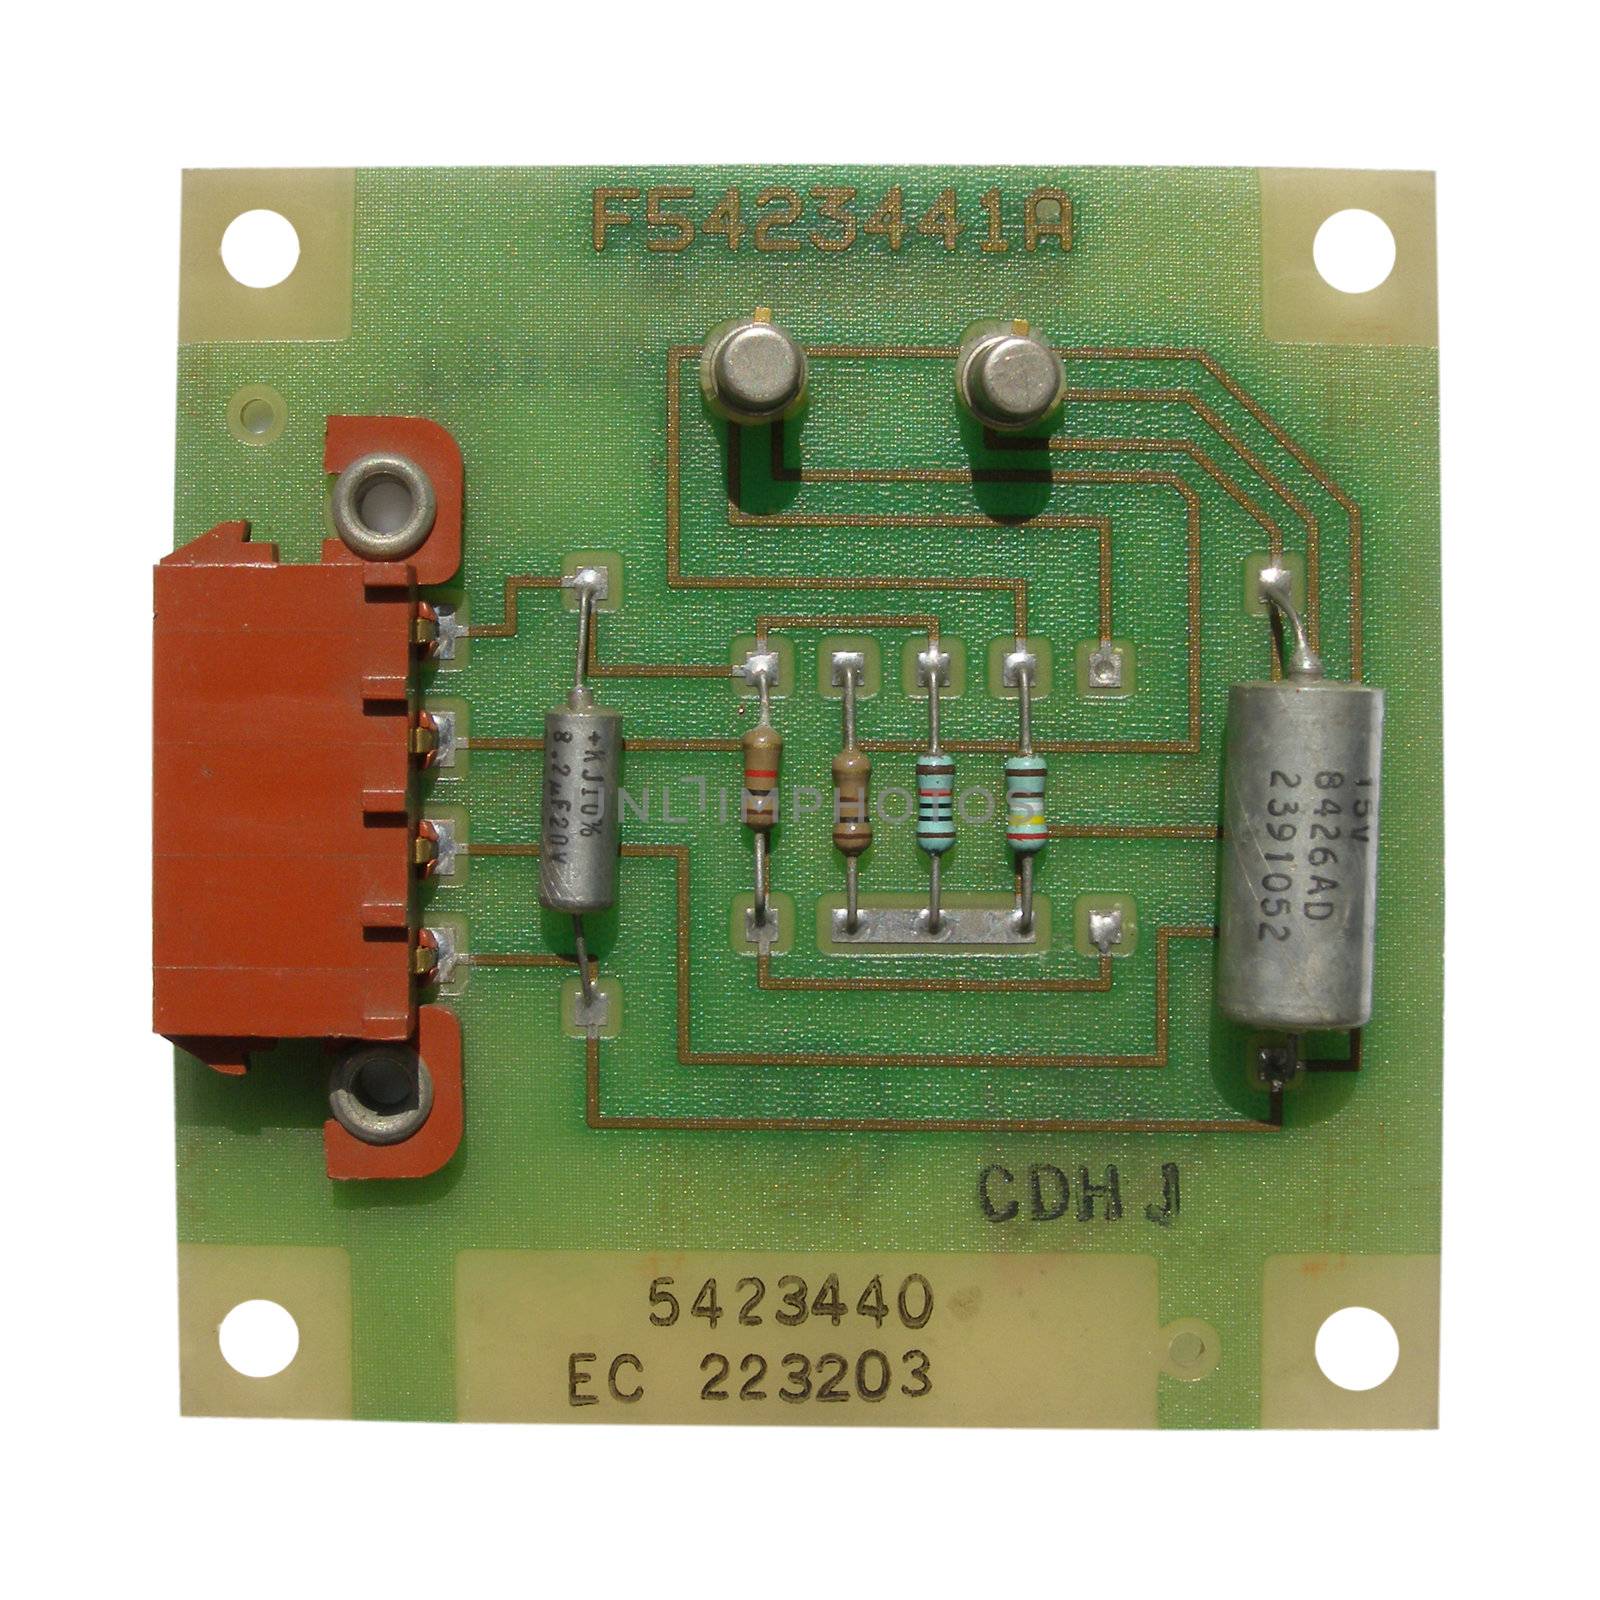 Printed circuit with electronic components